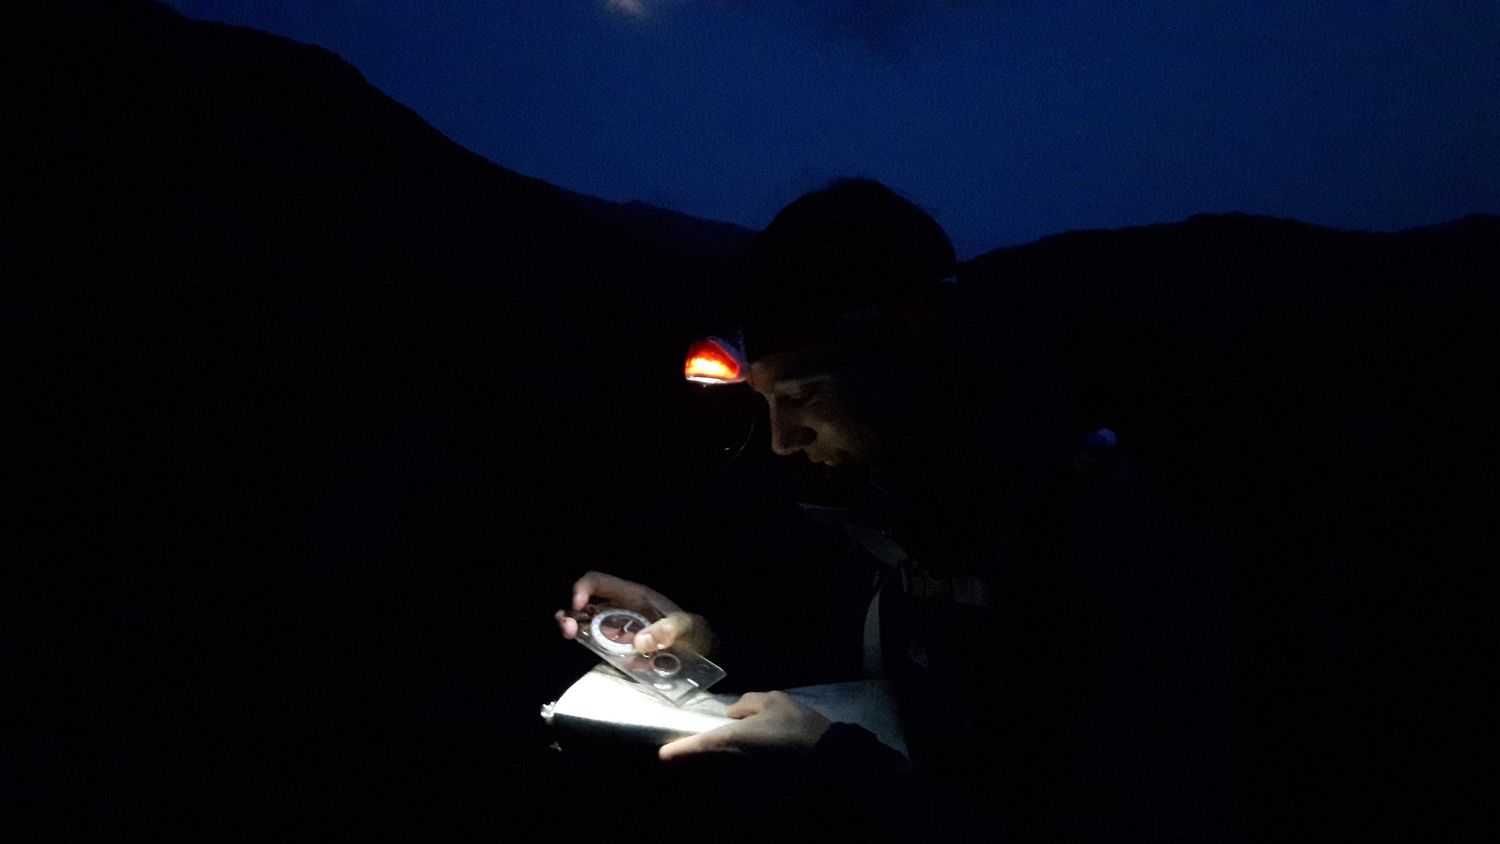  Night navigation on a Mountain Leader assessment course - Chris Ensoll Mountain Guide 